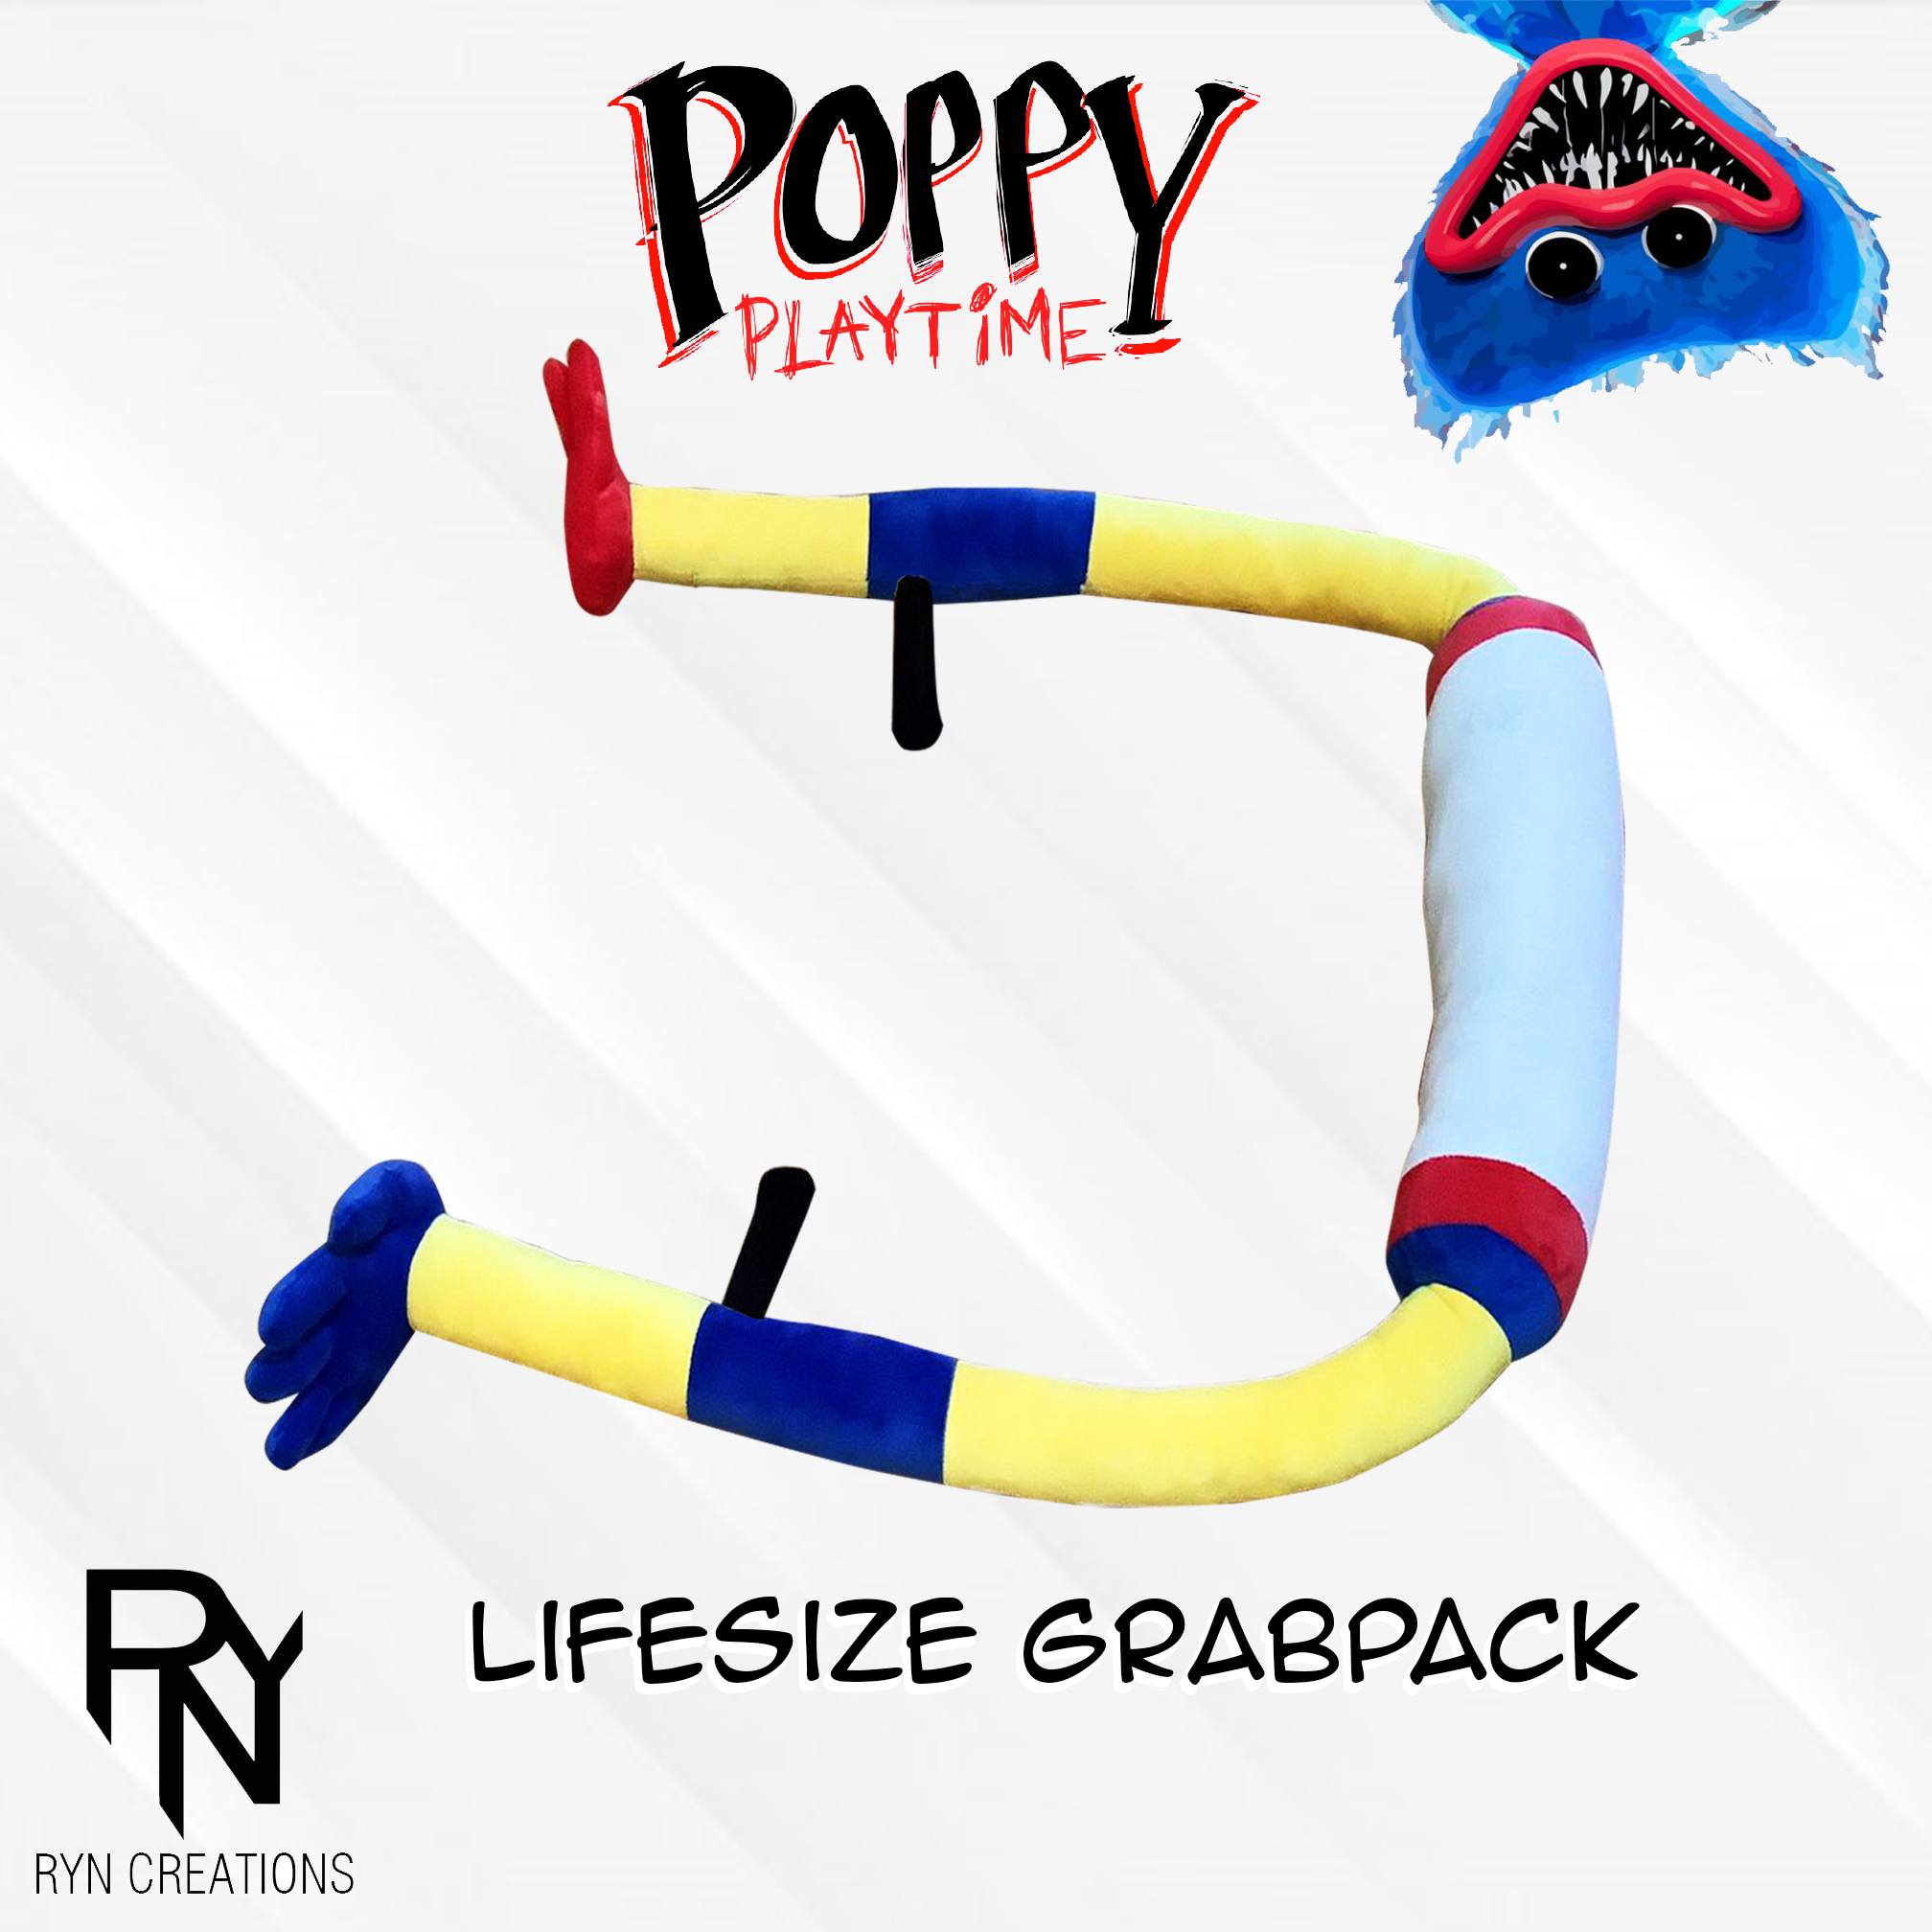 Made a Grab pack for my son : r/PoppyPlaytime